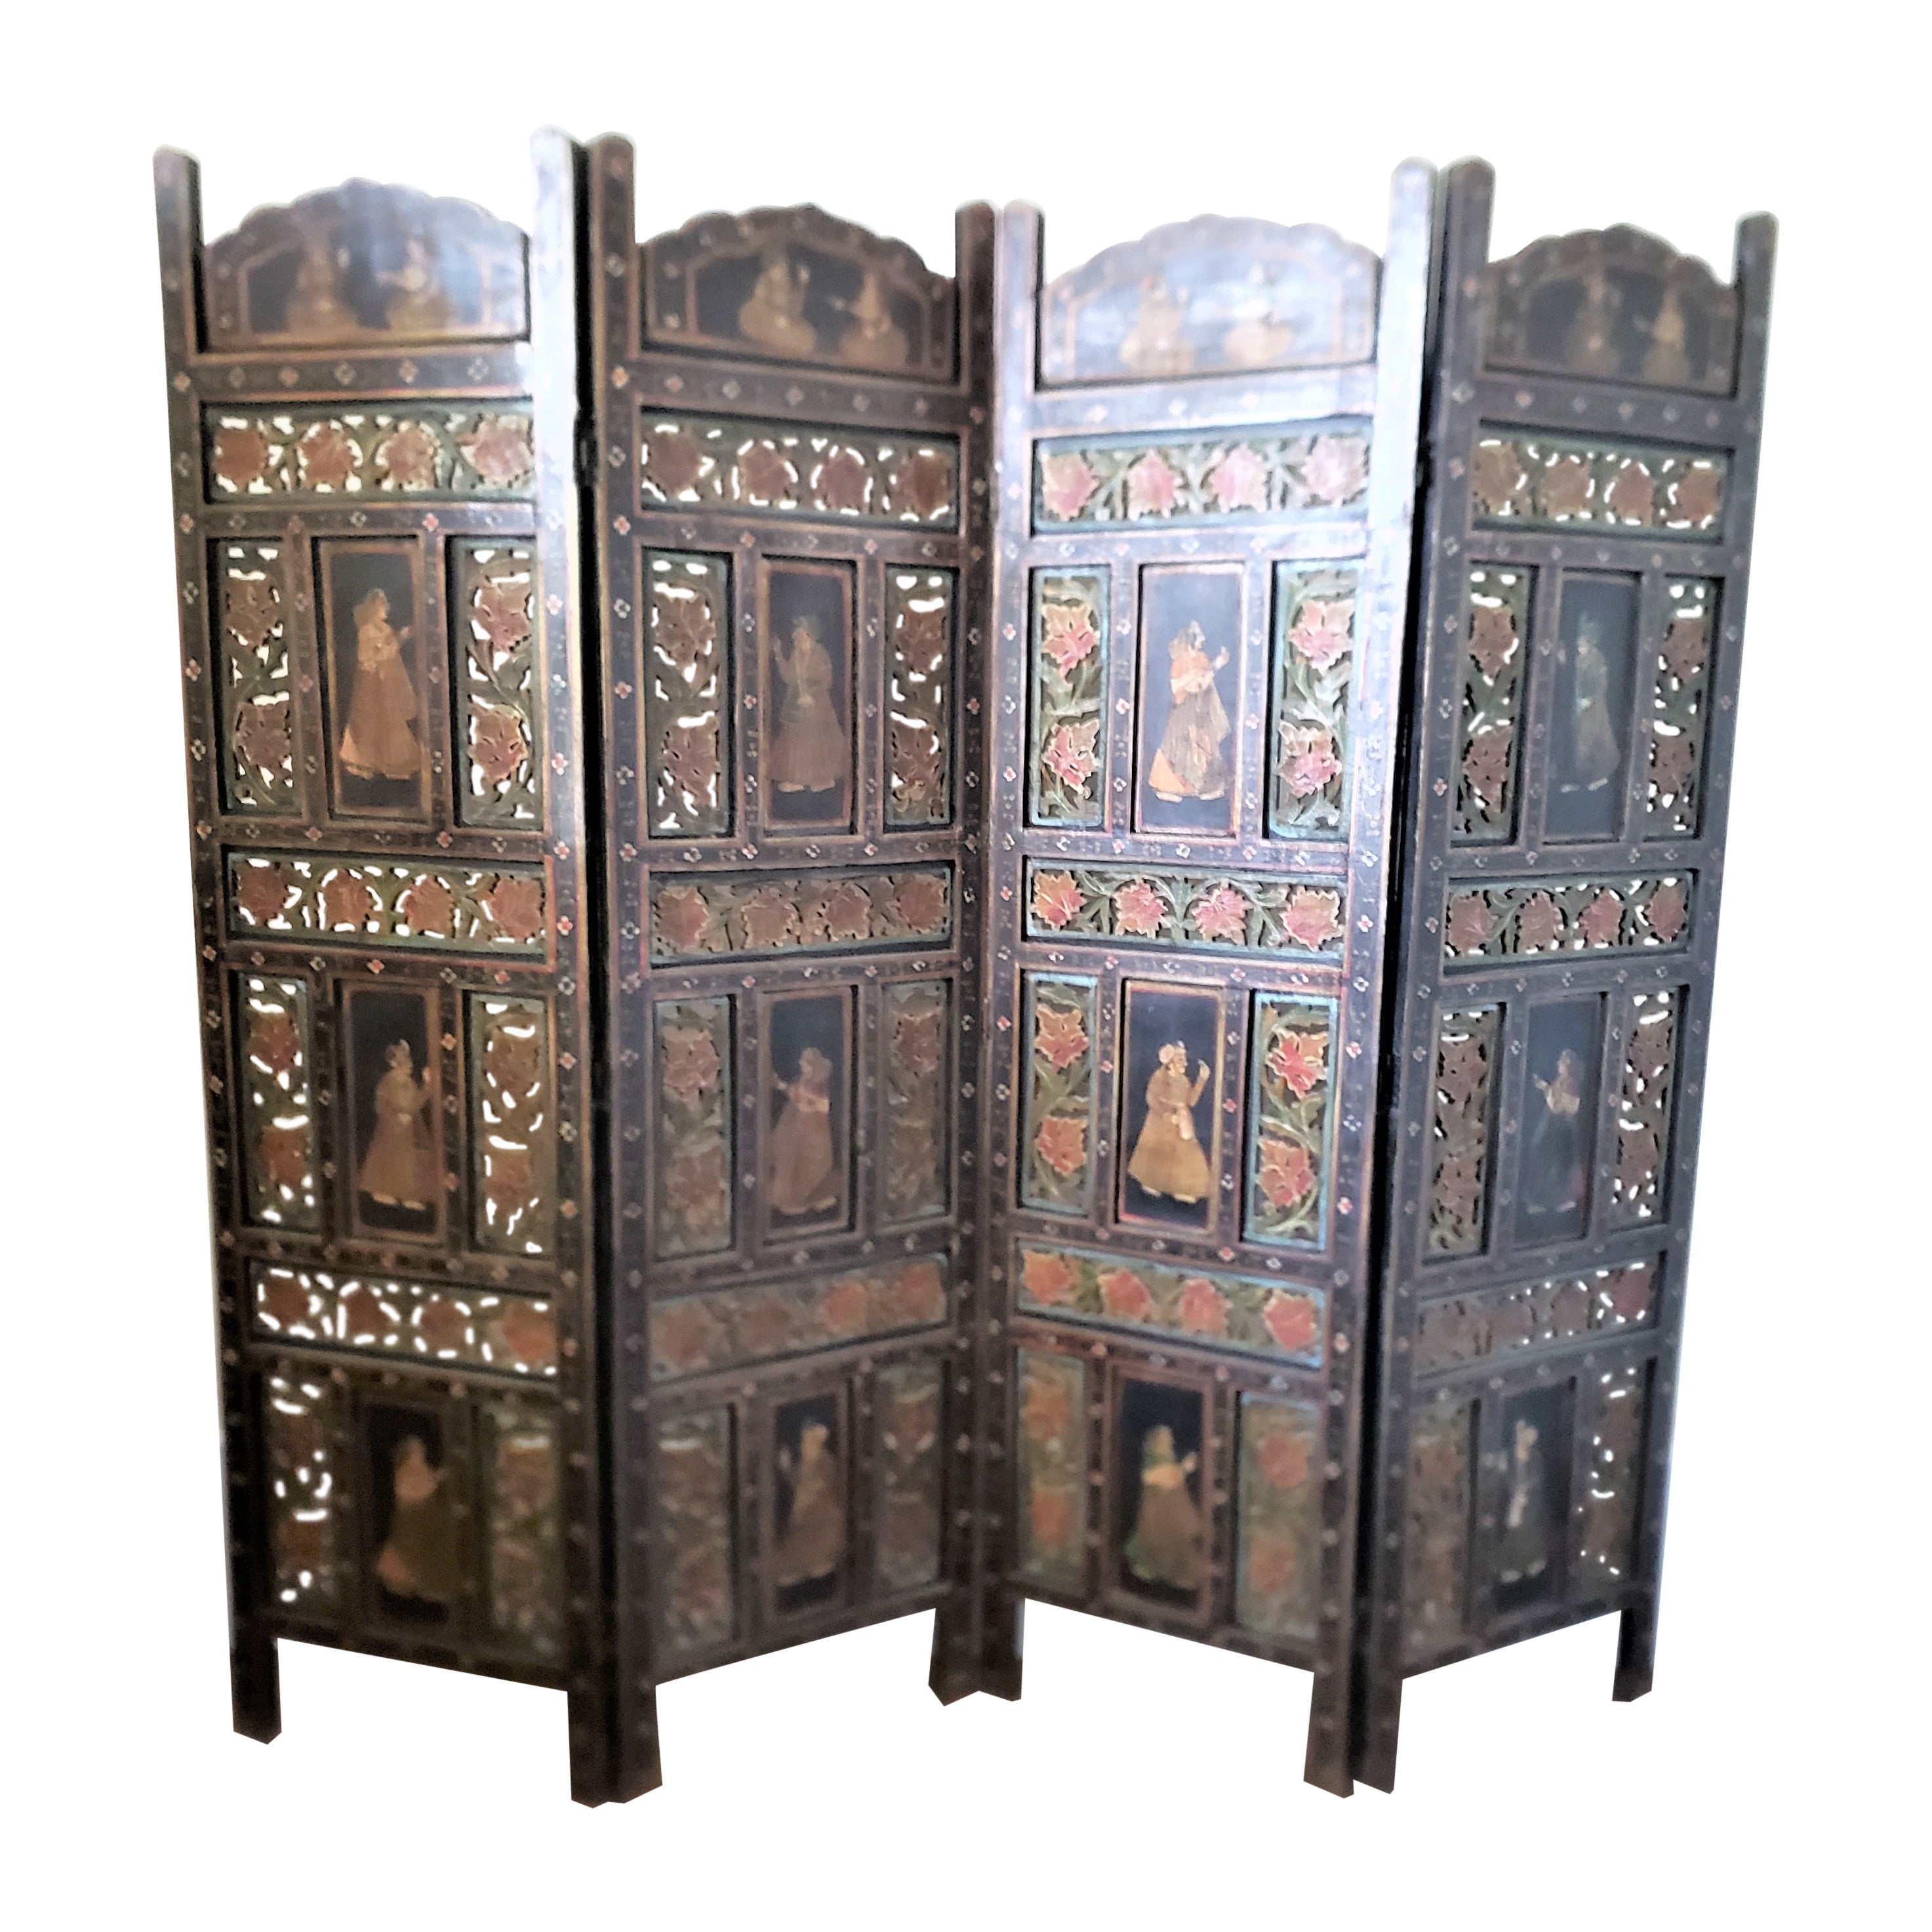 Antique Anglo-Indian Hand-Painted Wooden Four Panel Screen or Room Divider